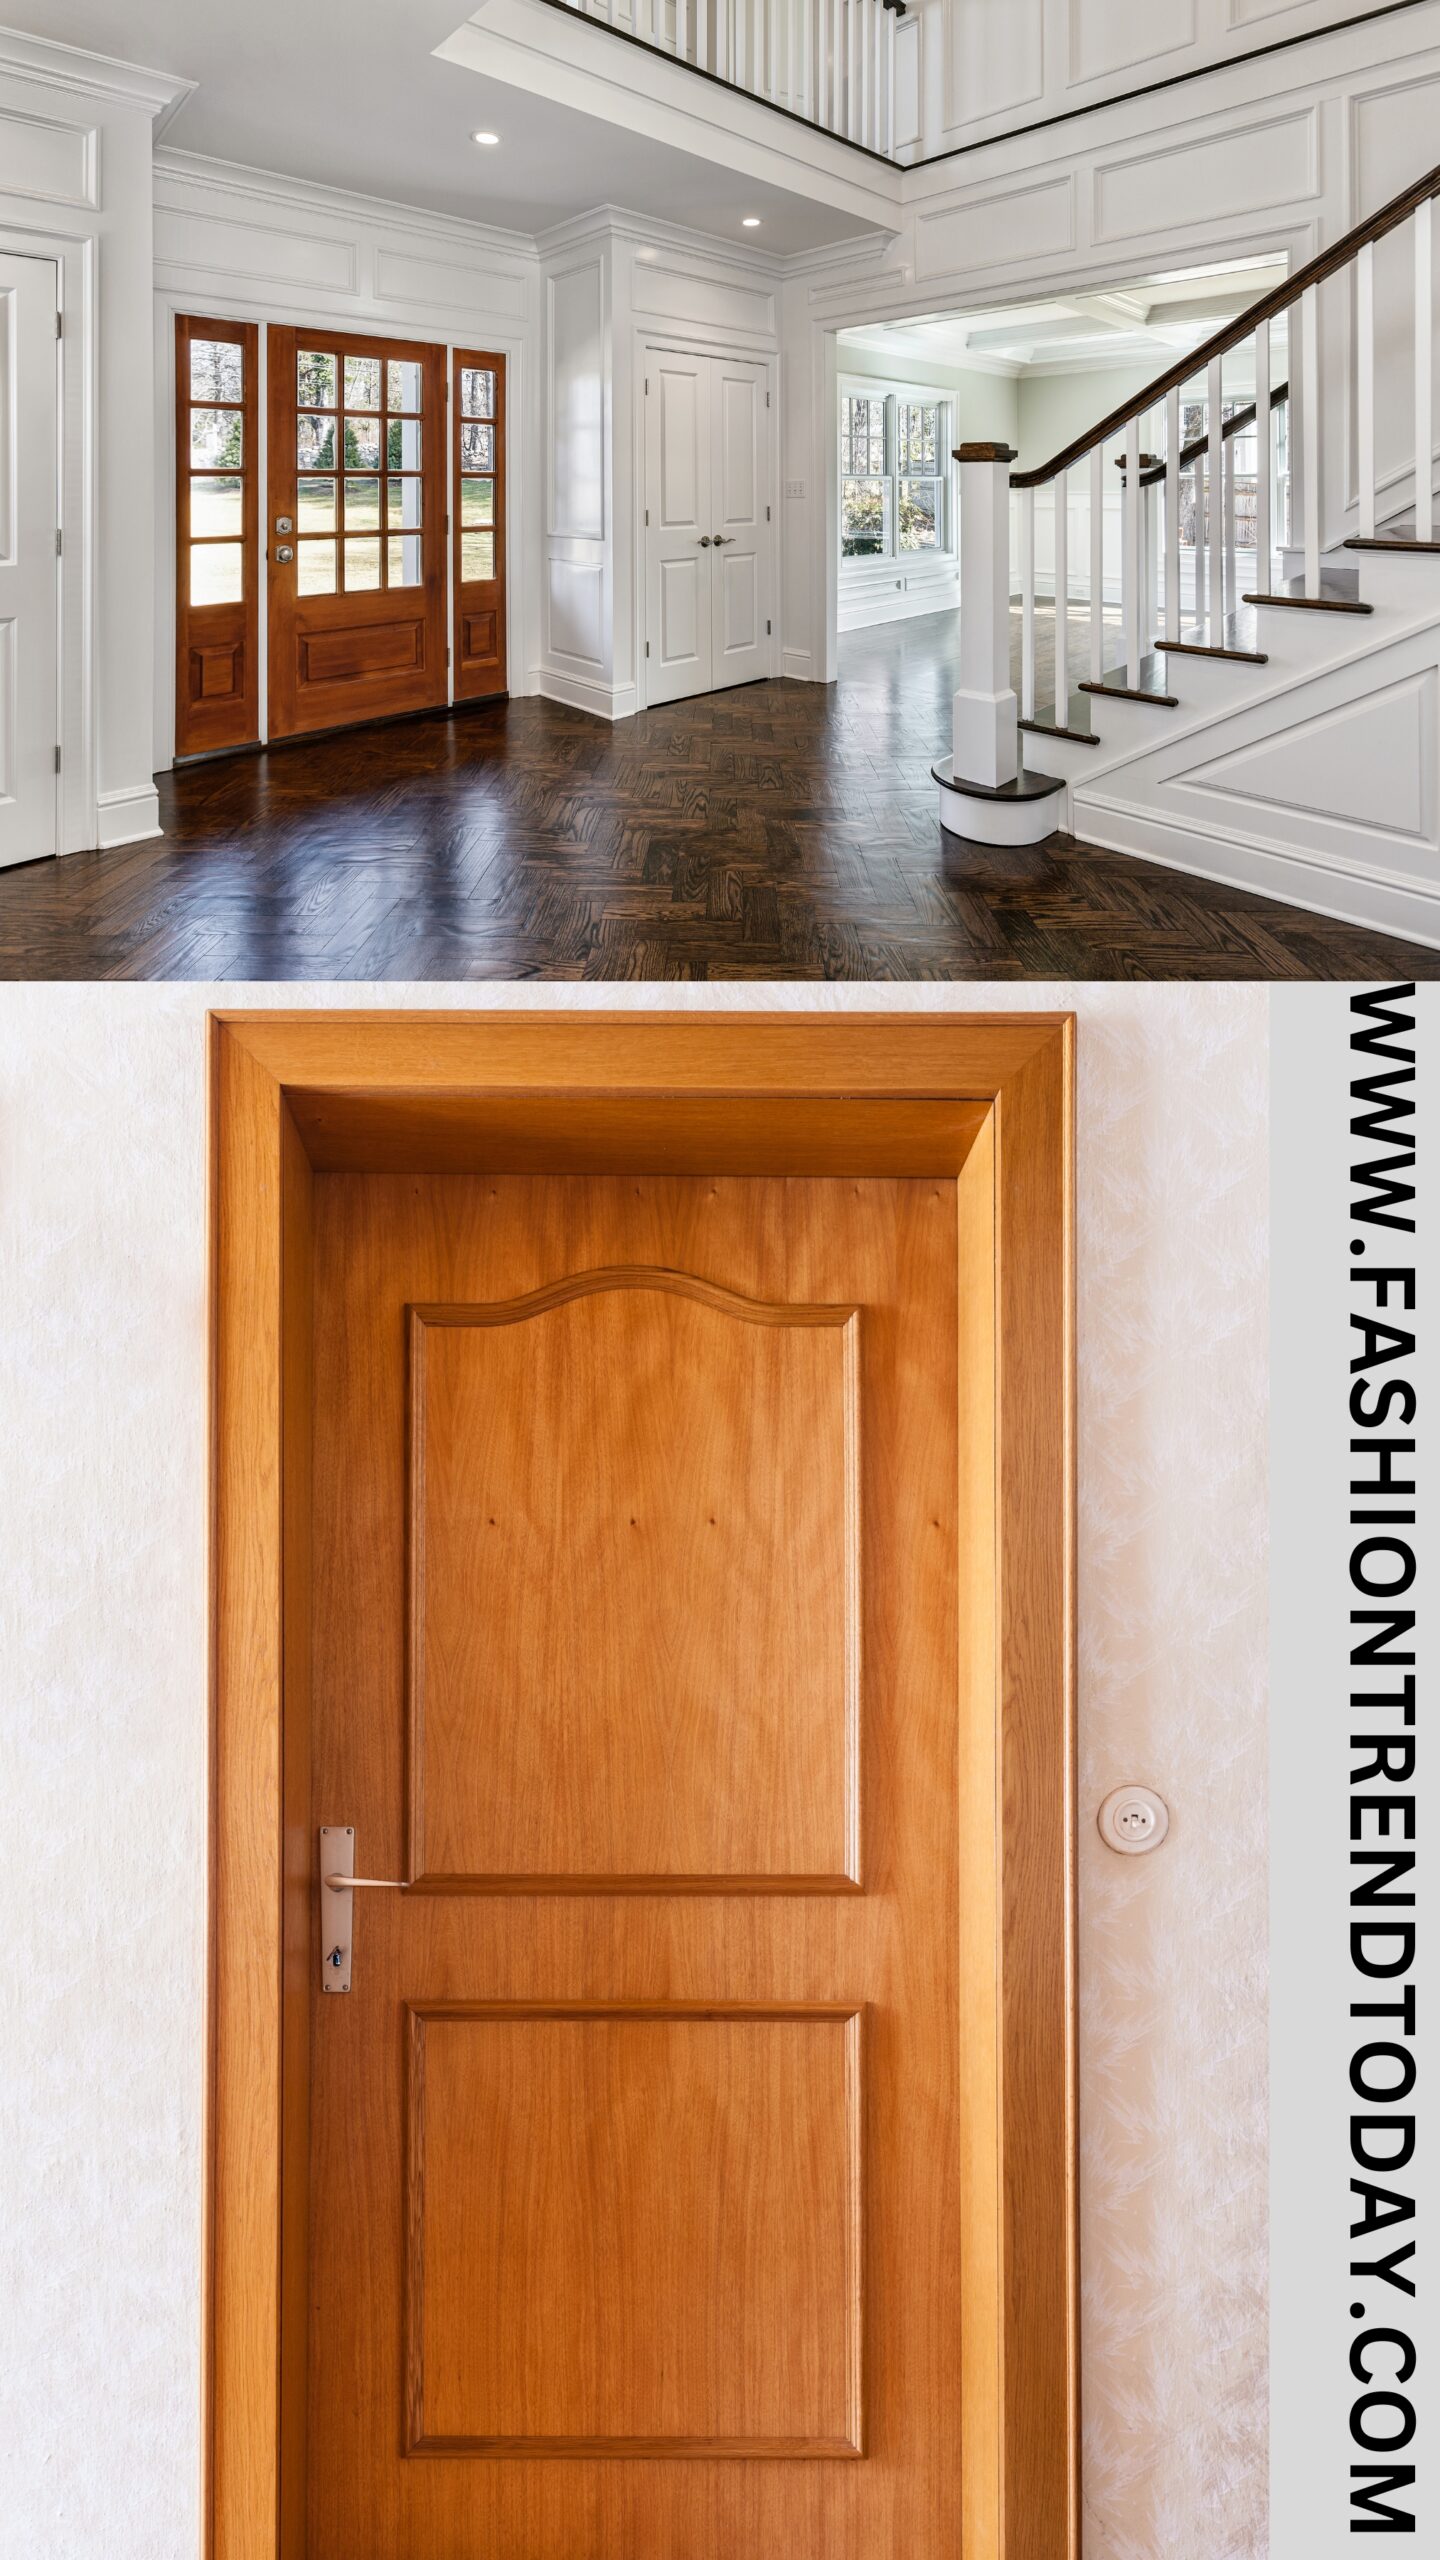 Transform Your Space, One Door at a Time